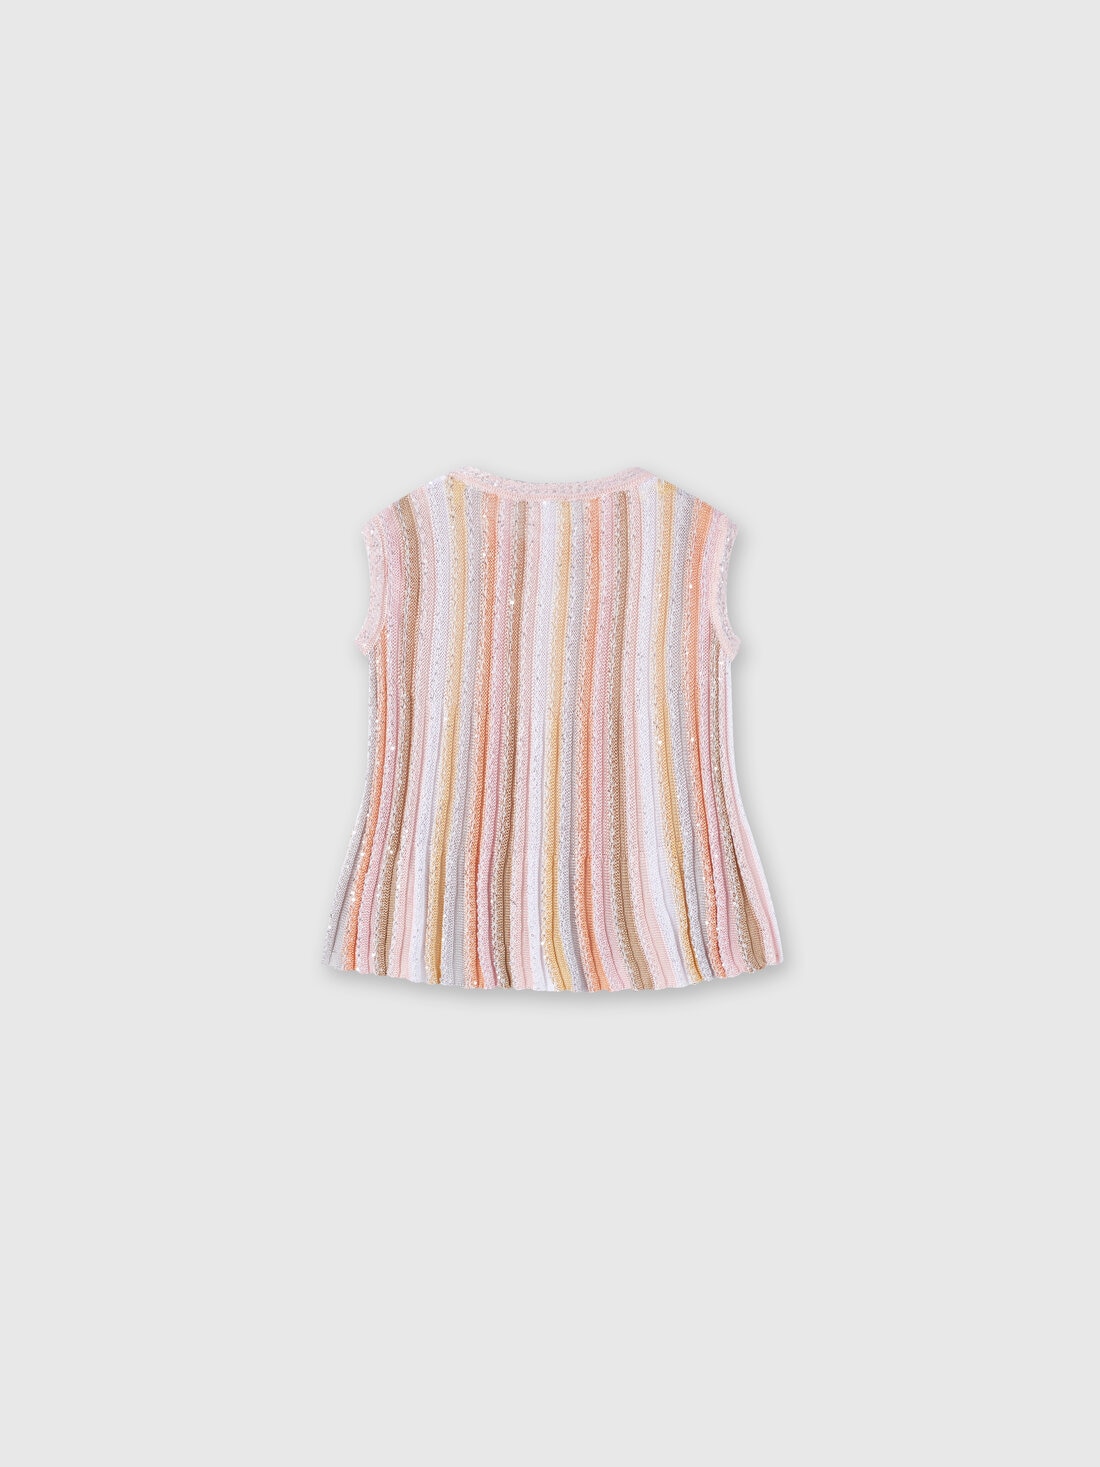 Sleeveless top in pleated viscose knit with sequins, Multicoloured  - KS24SN01BV00FXSM923 - 1